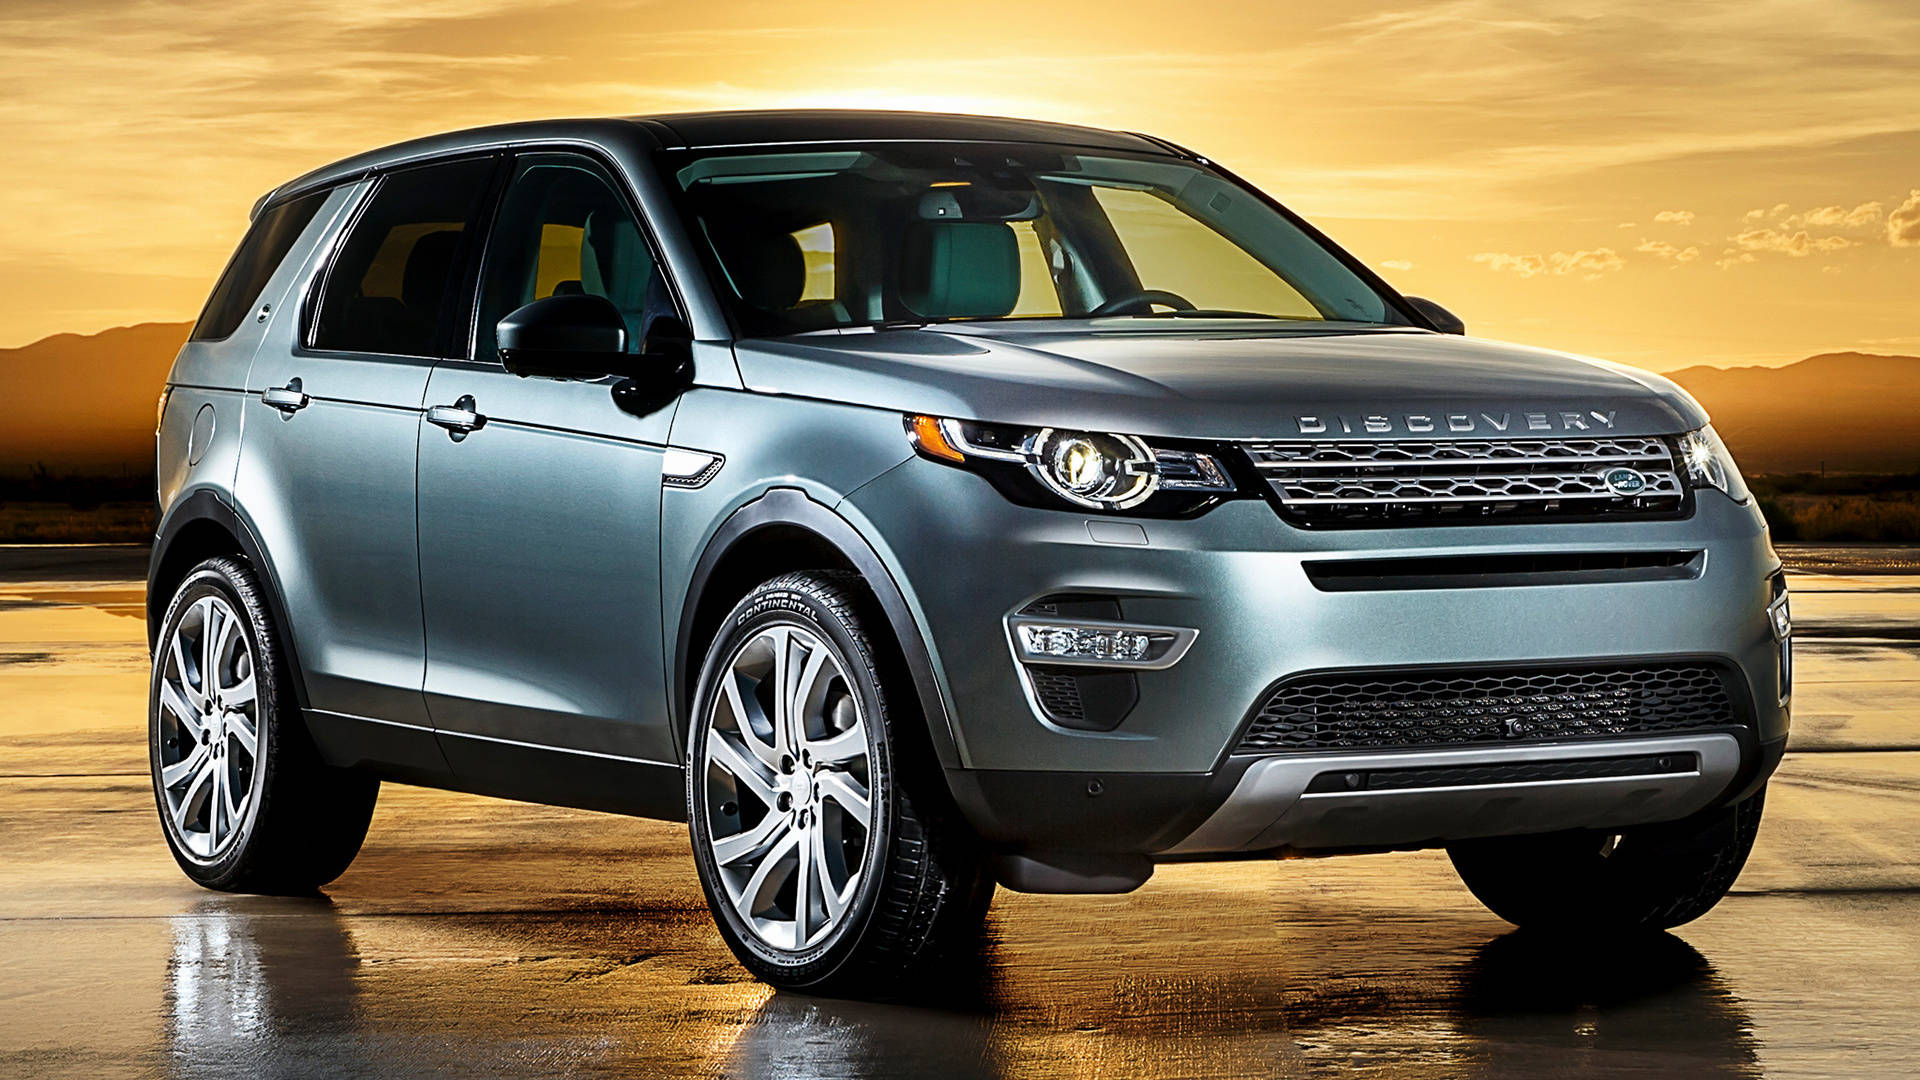 2015 Discovery Land Rover Iphone